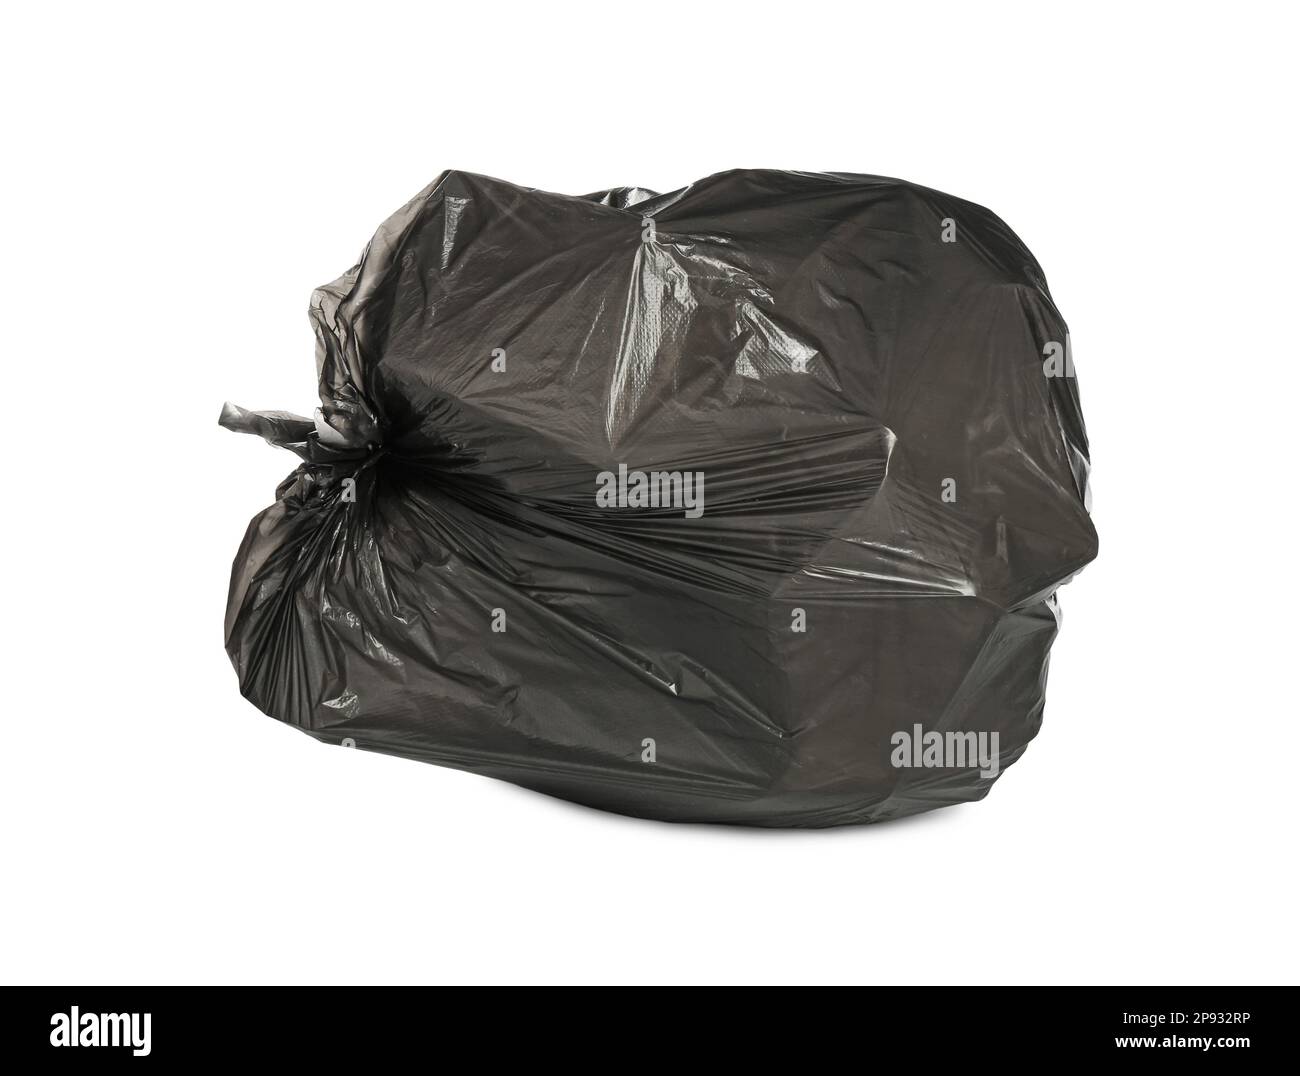 Bin bag Waste container Gunny sack, Garbage bags, leather